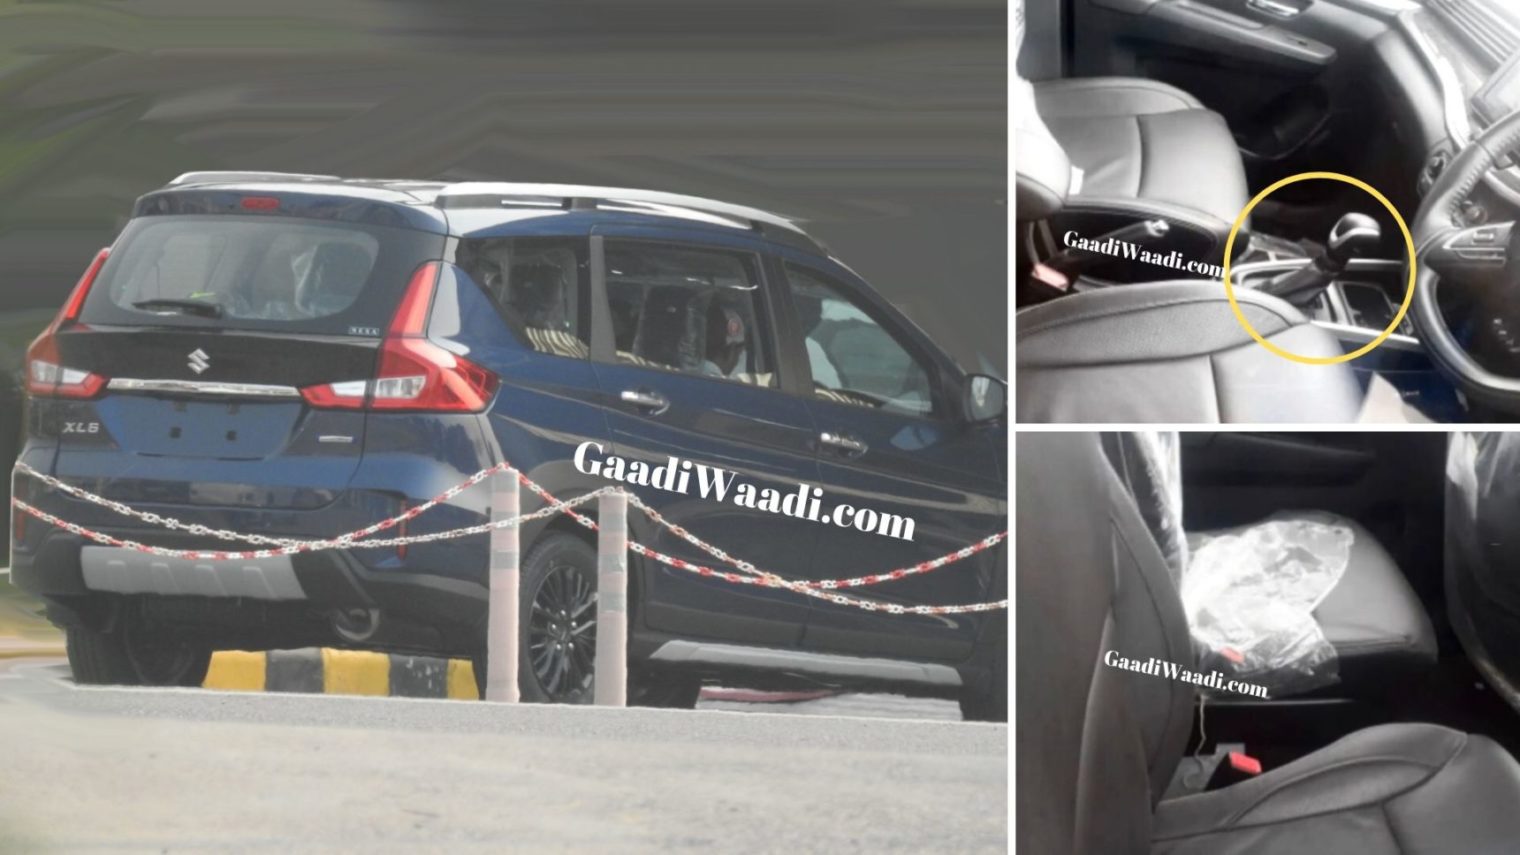 Upcoming Maruti Suzuki Xl6 Likely To Priced From Rs 9 49